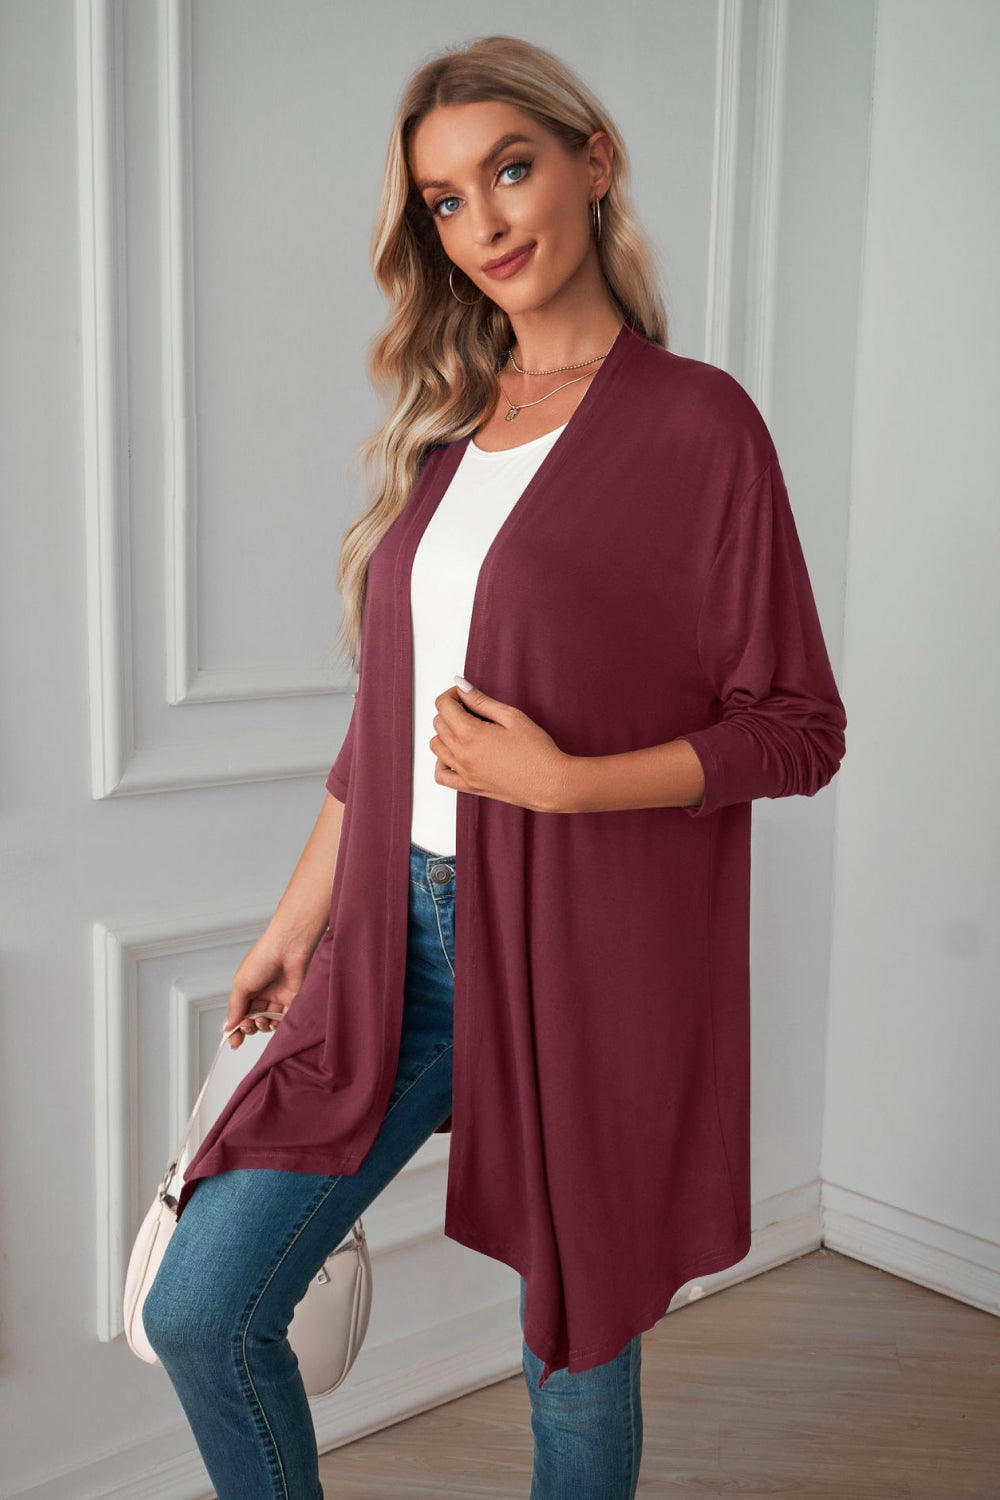 Open Front Long Sleeve Cardigan - Women’s Clothing & Accessories - Shirts & Tops - 18 - 2024